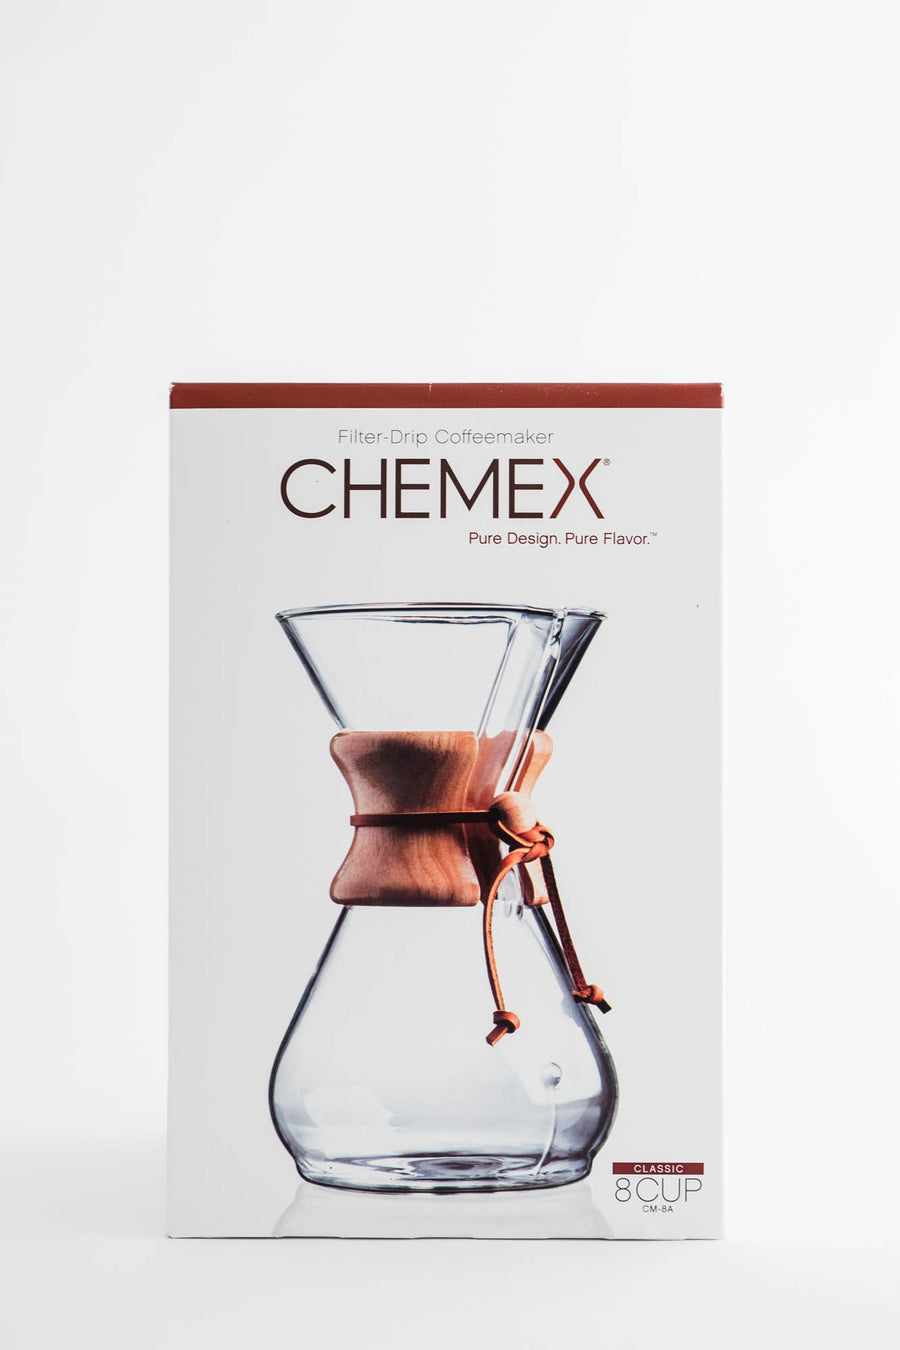 Chemex Classic 6-cup Pour Over Brewer